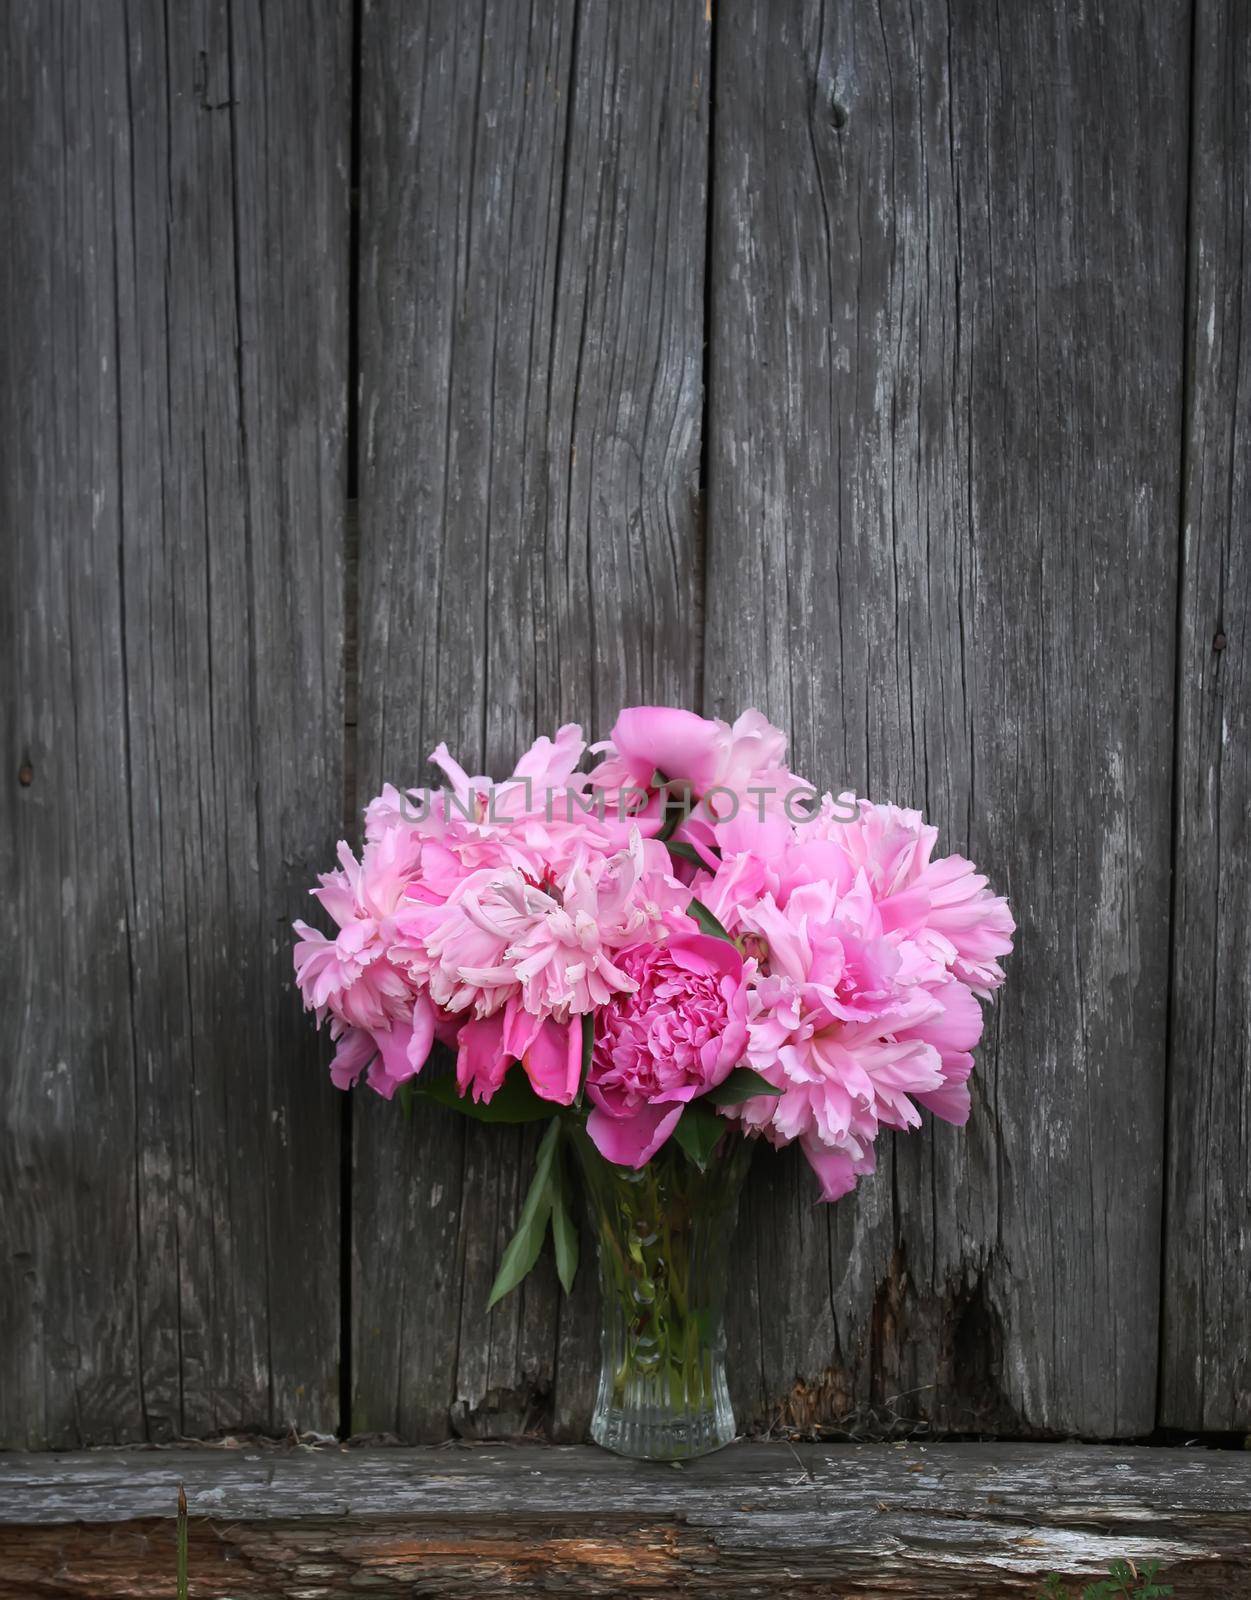 Bouquet of peony flowers on a wooden bench outdoors